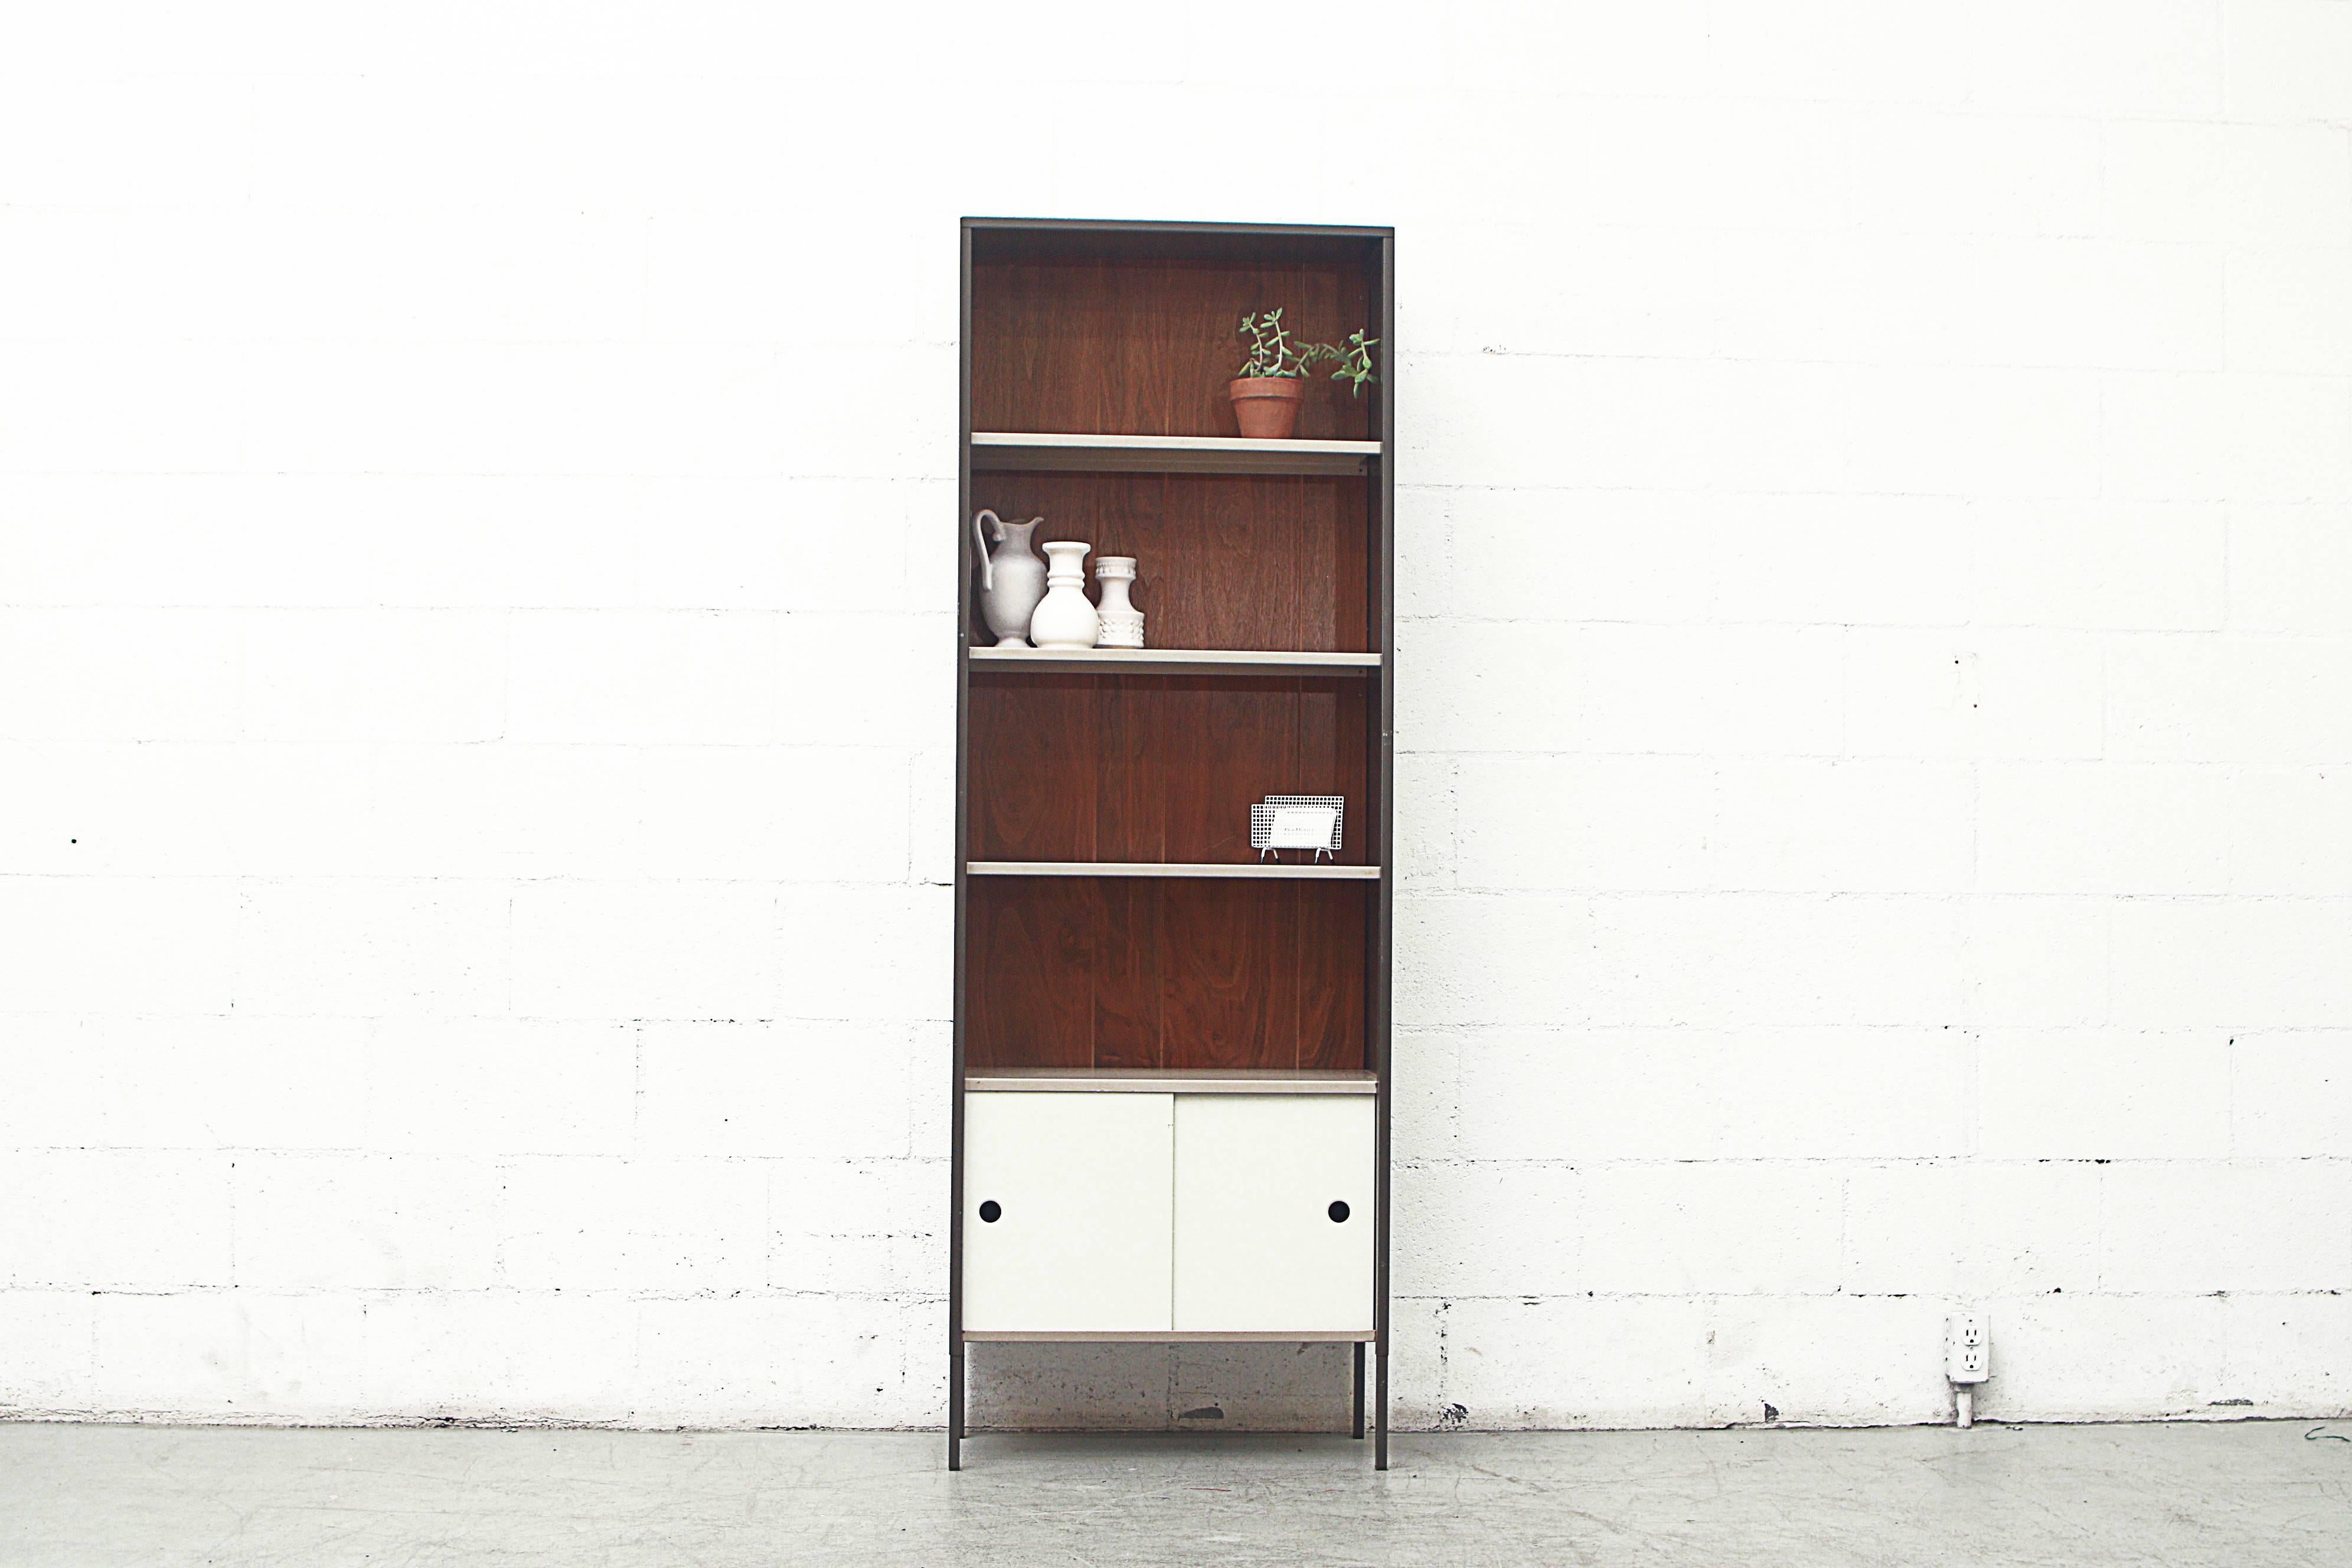 Brown enameled metal cabinet with wood paneled backing, beige enameled metal shelves over a small cabinet with bone white enameled metal sliding doors. Visible wear, scratching and minimal paint loss to some of the shelves and doors. Condition is